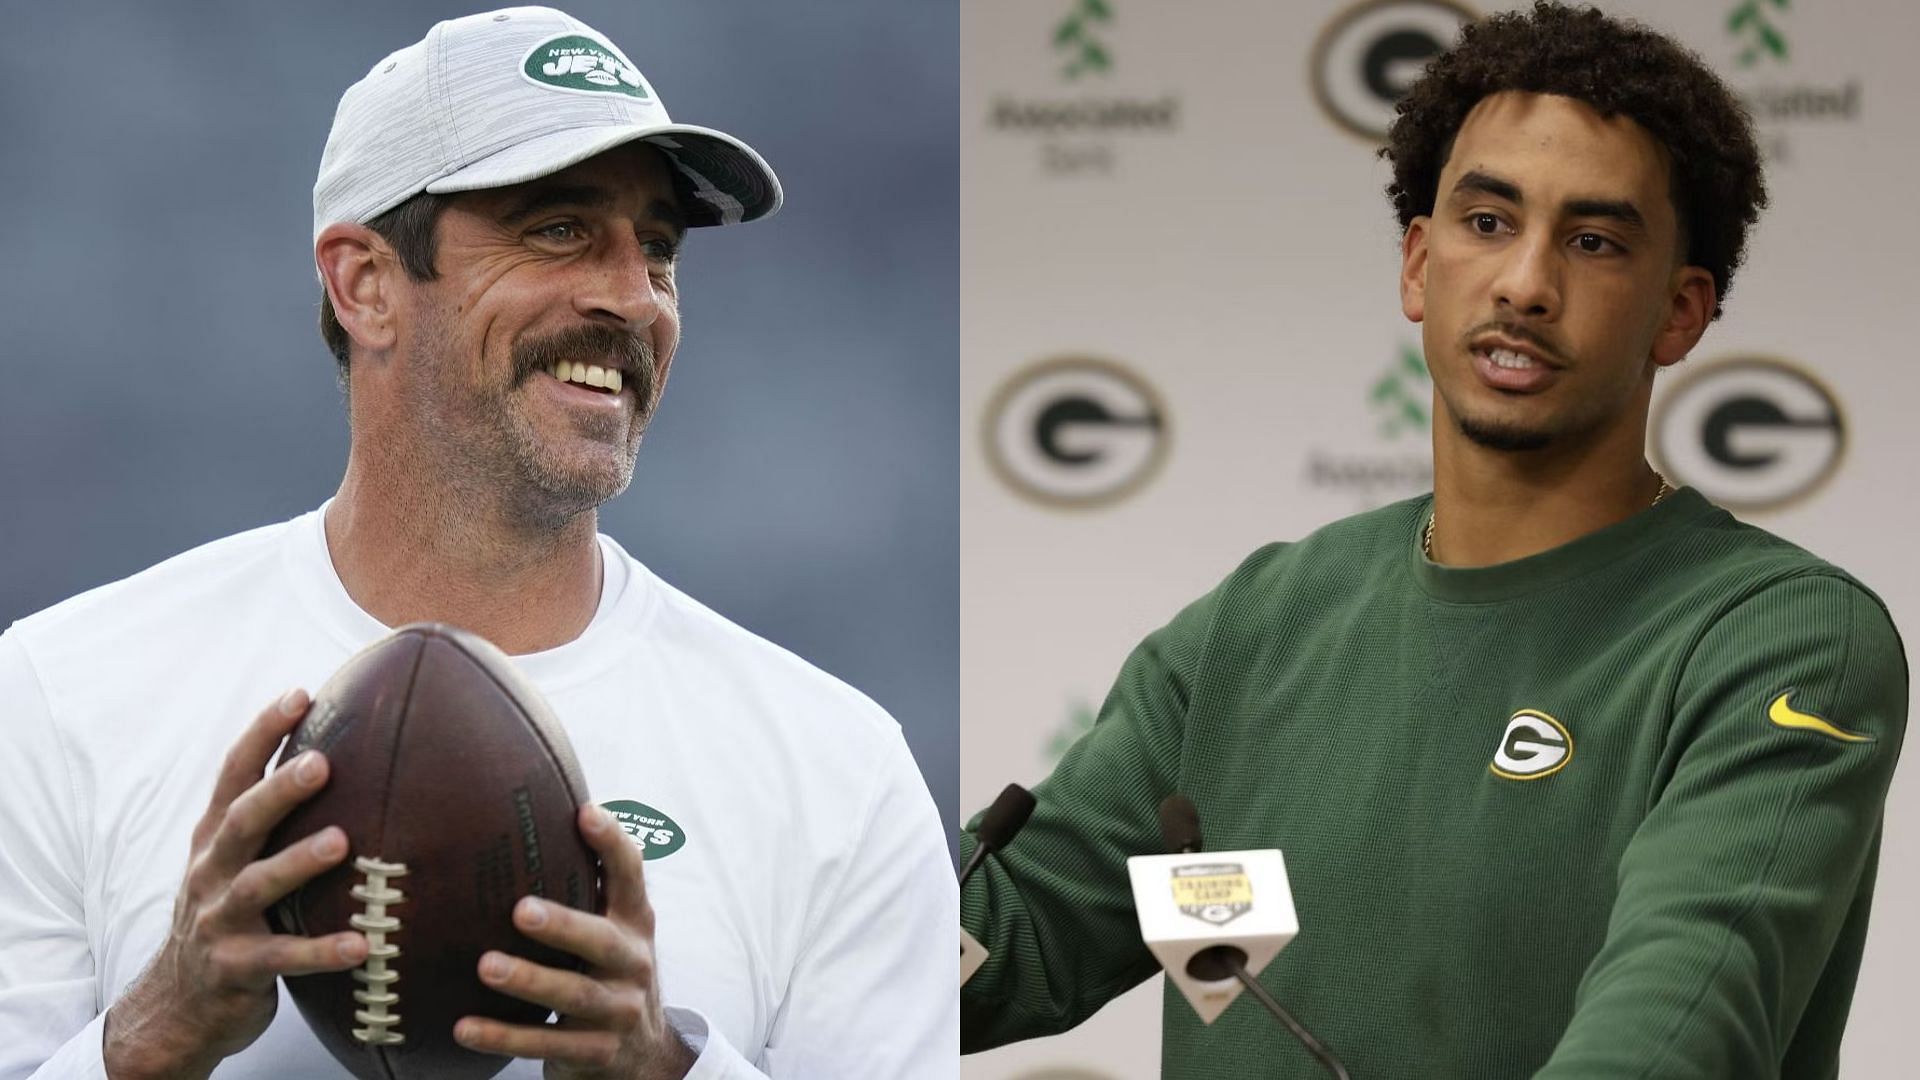 Aaron Rodgers imparted wisdom to his former backup, Green Bay Packers starting quarterback Jordan Love.